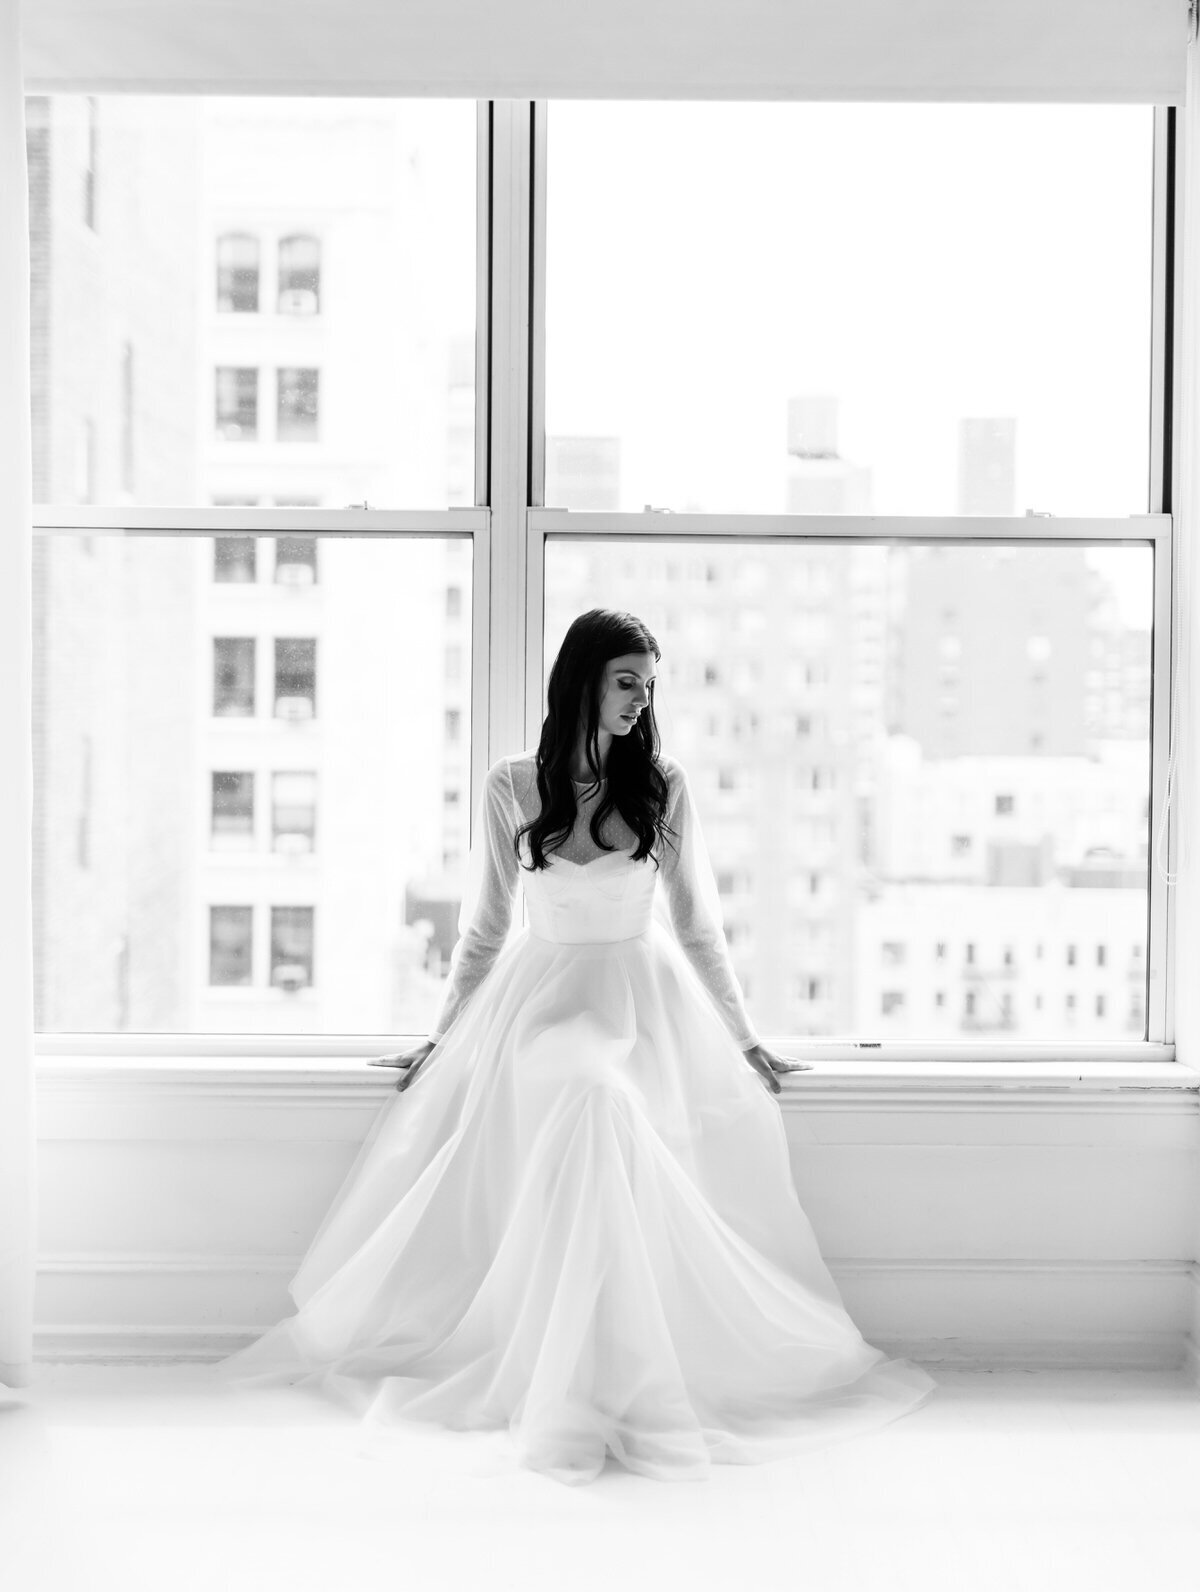 Stylish Bridal Editorial Photography for a New York City Brand 10